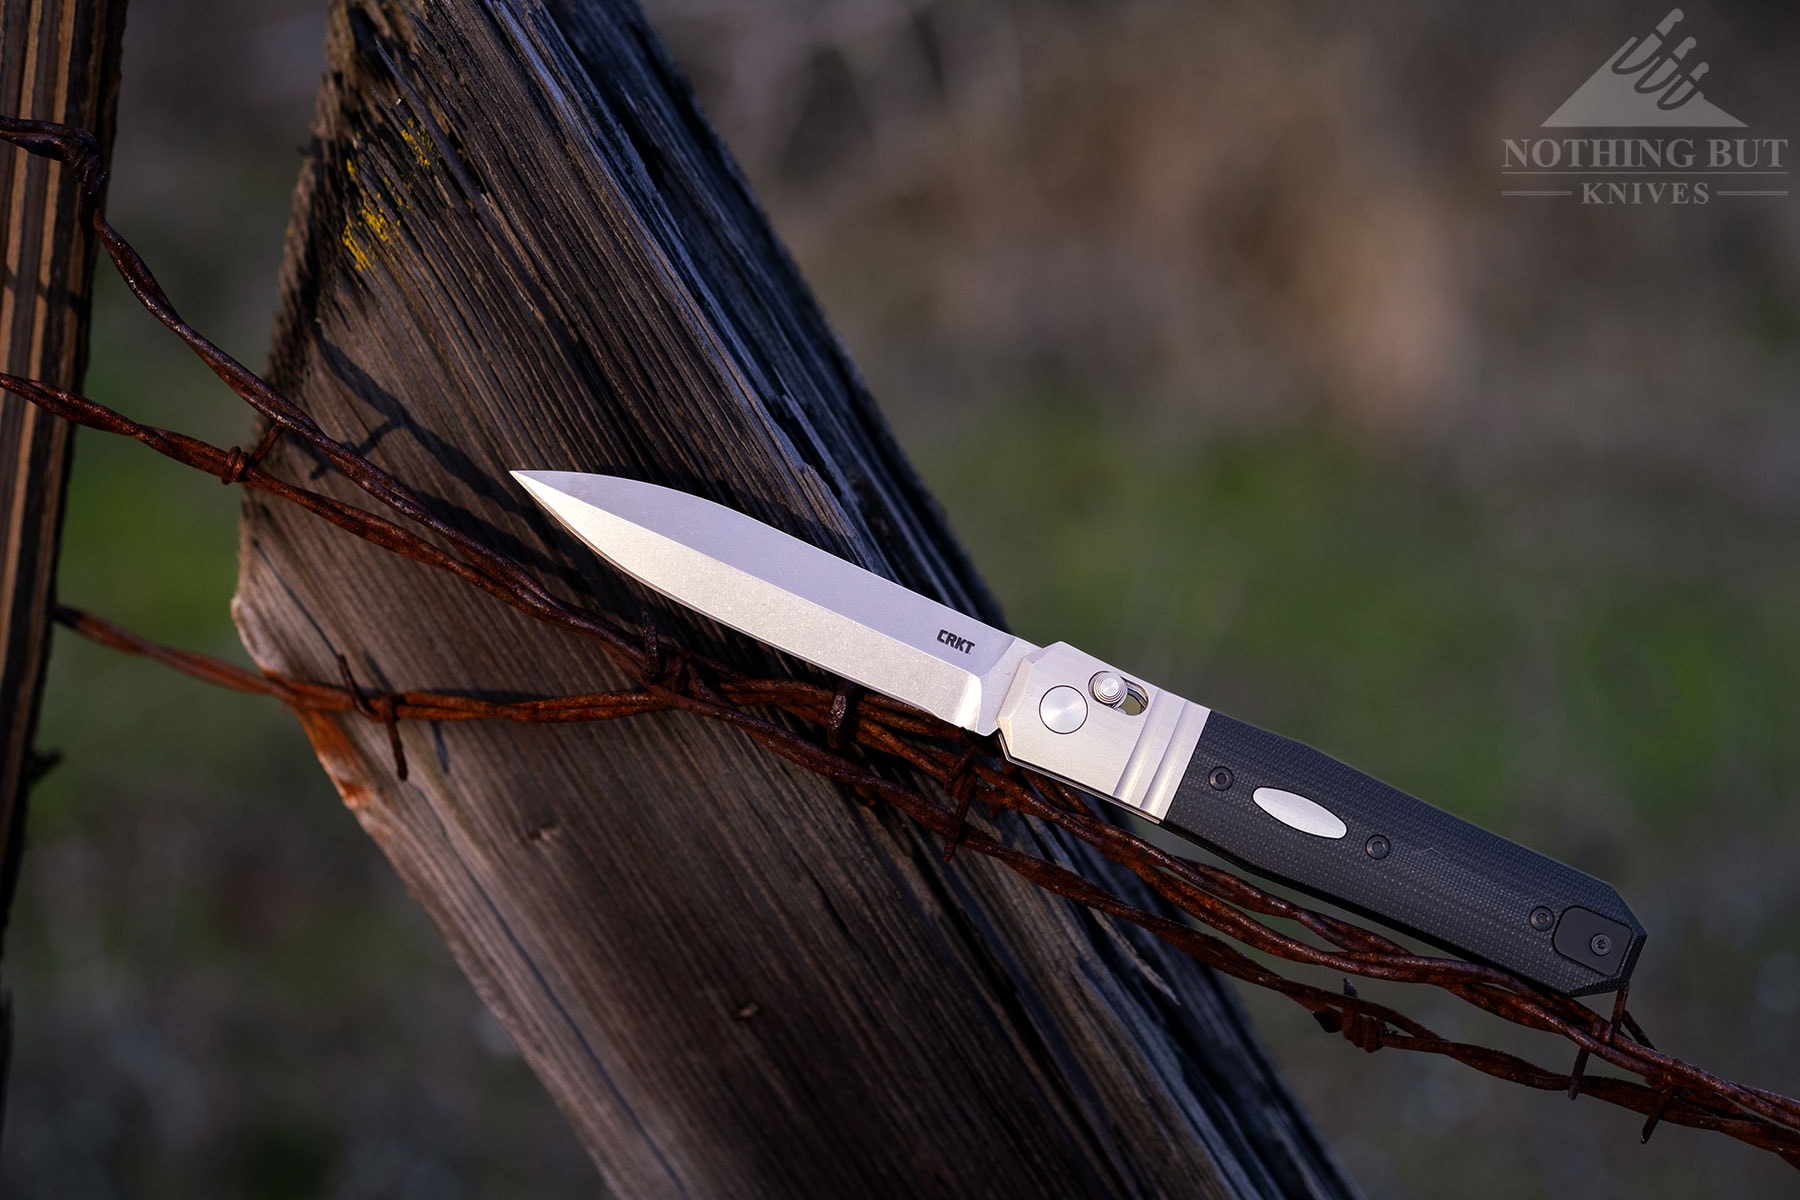 The US made Redemption is one of our favorite CRKT folders.